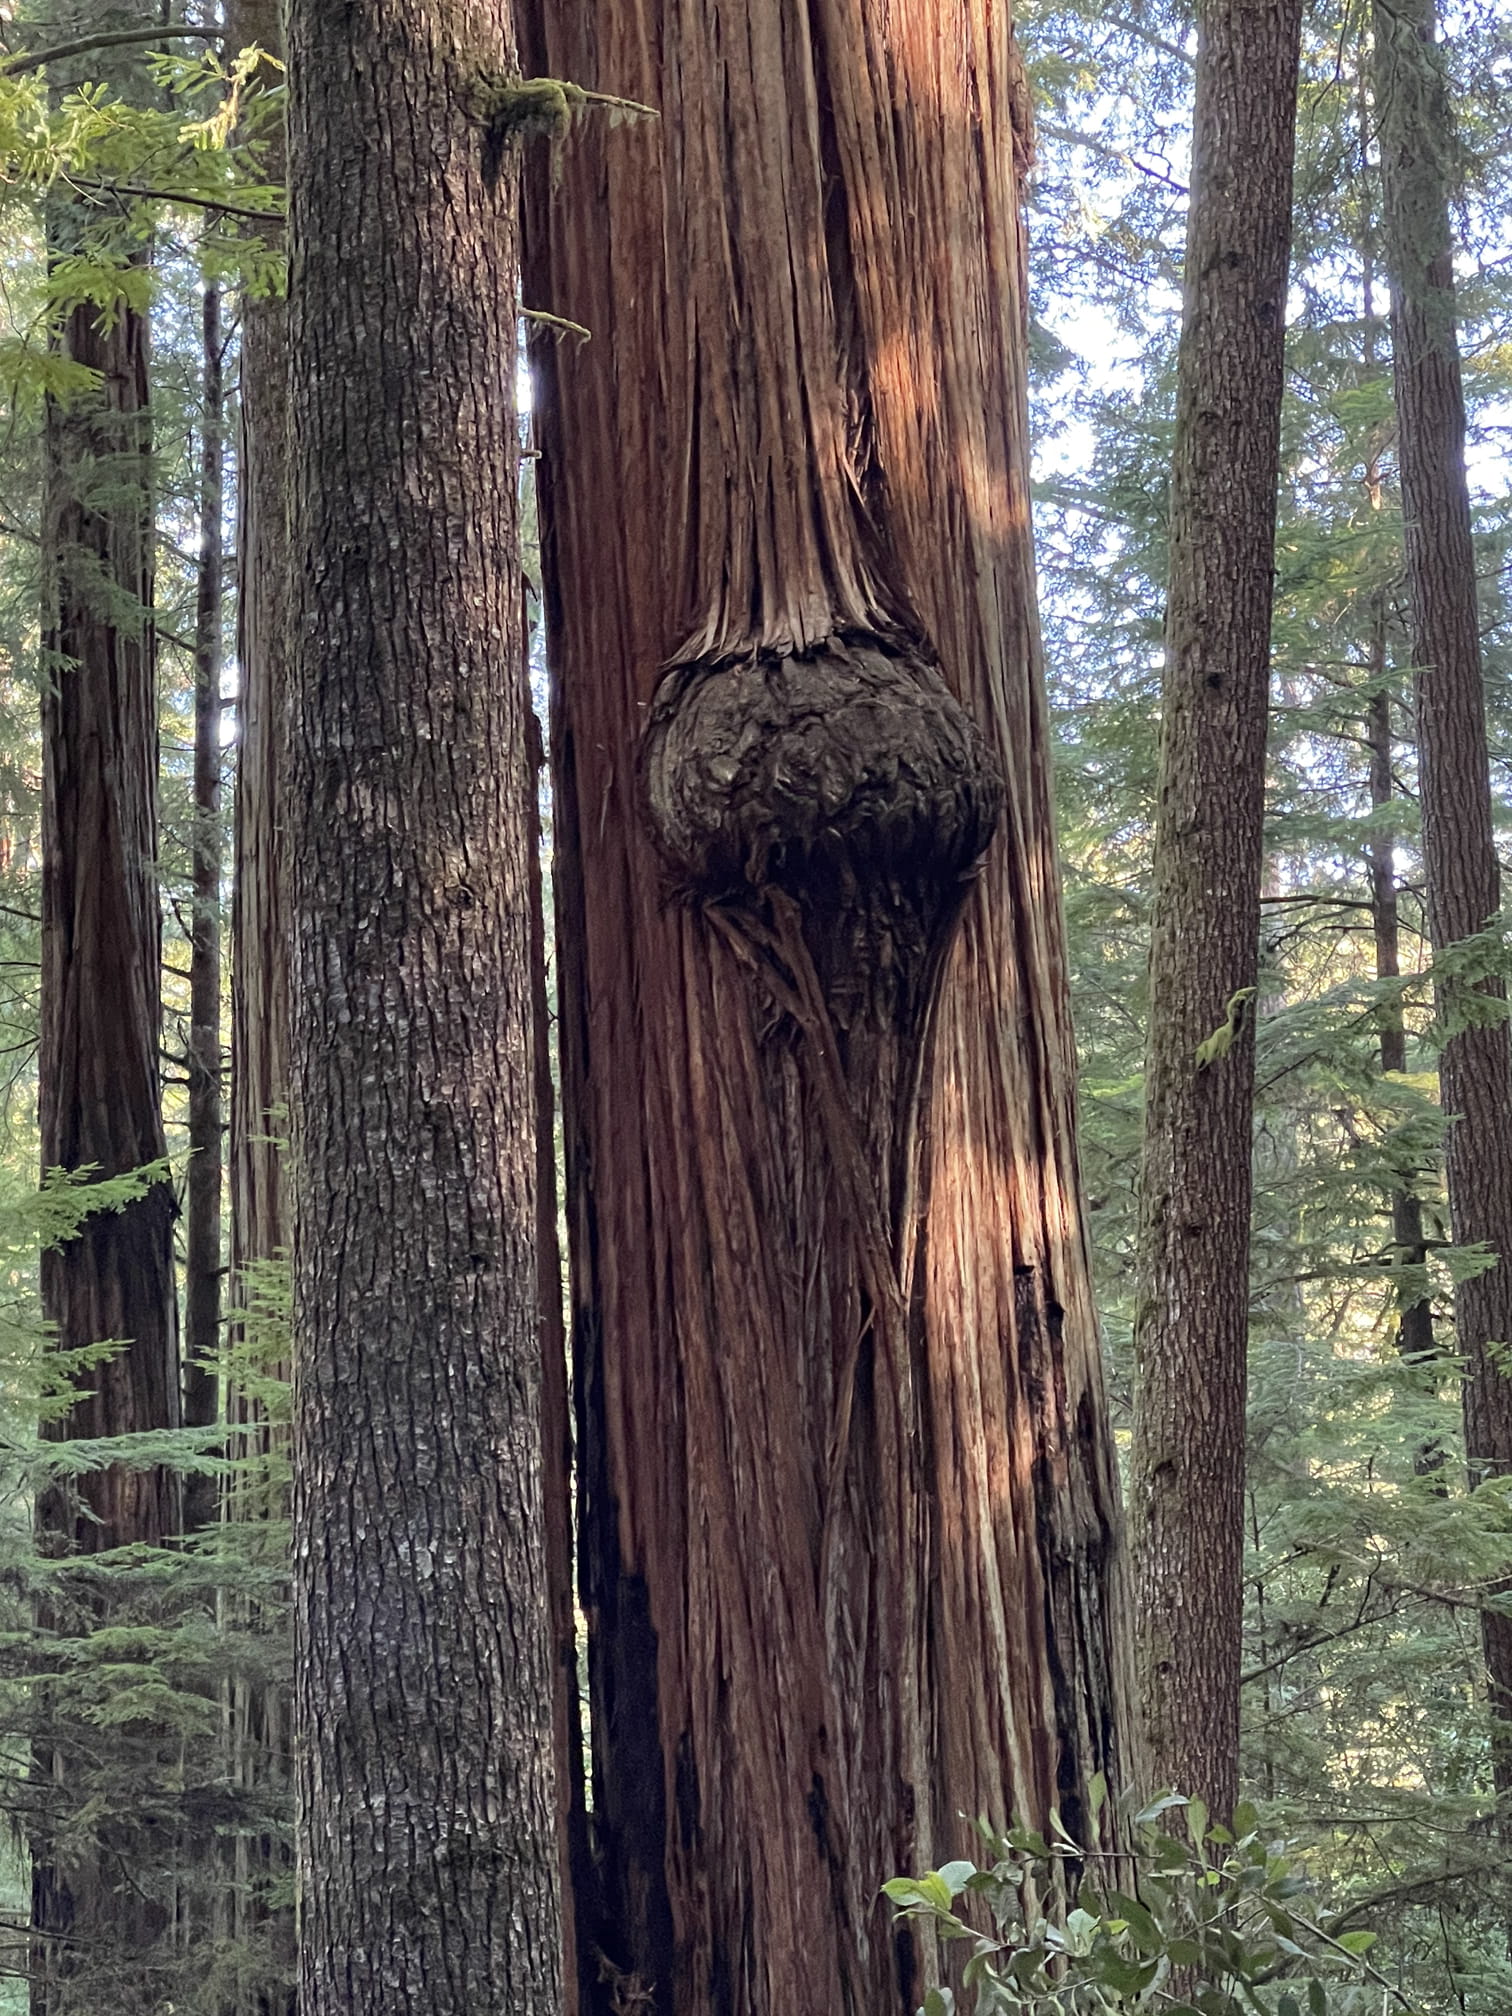 Burl in a redwood